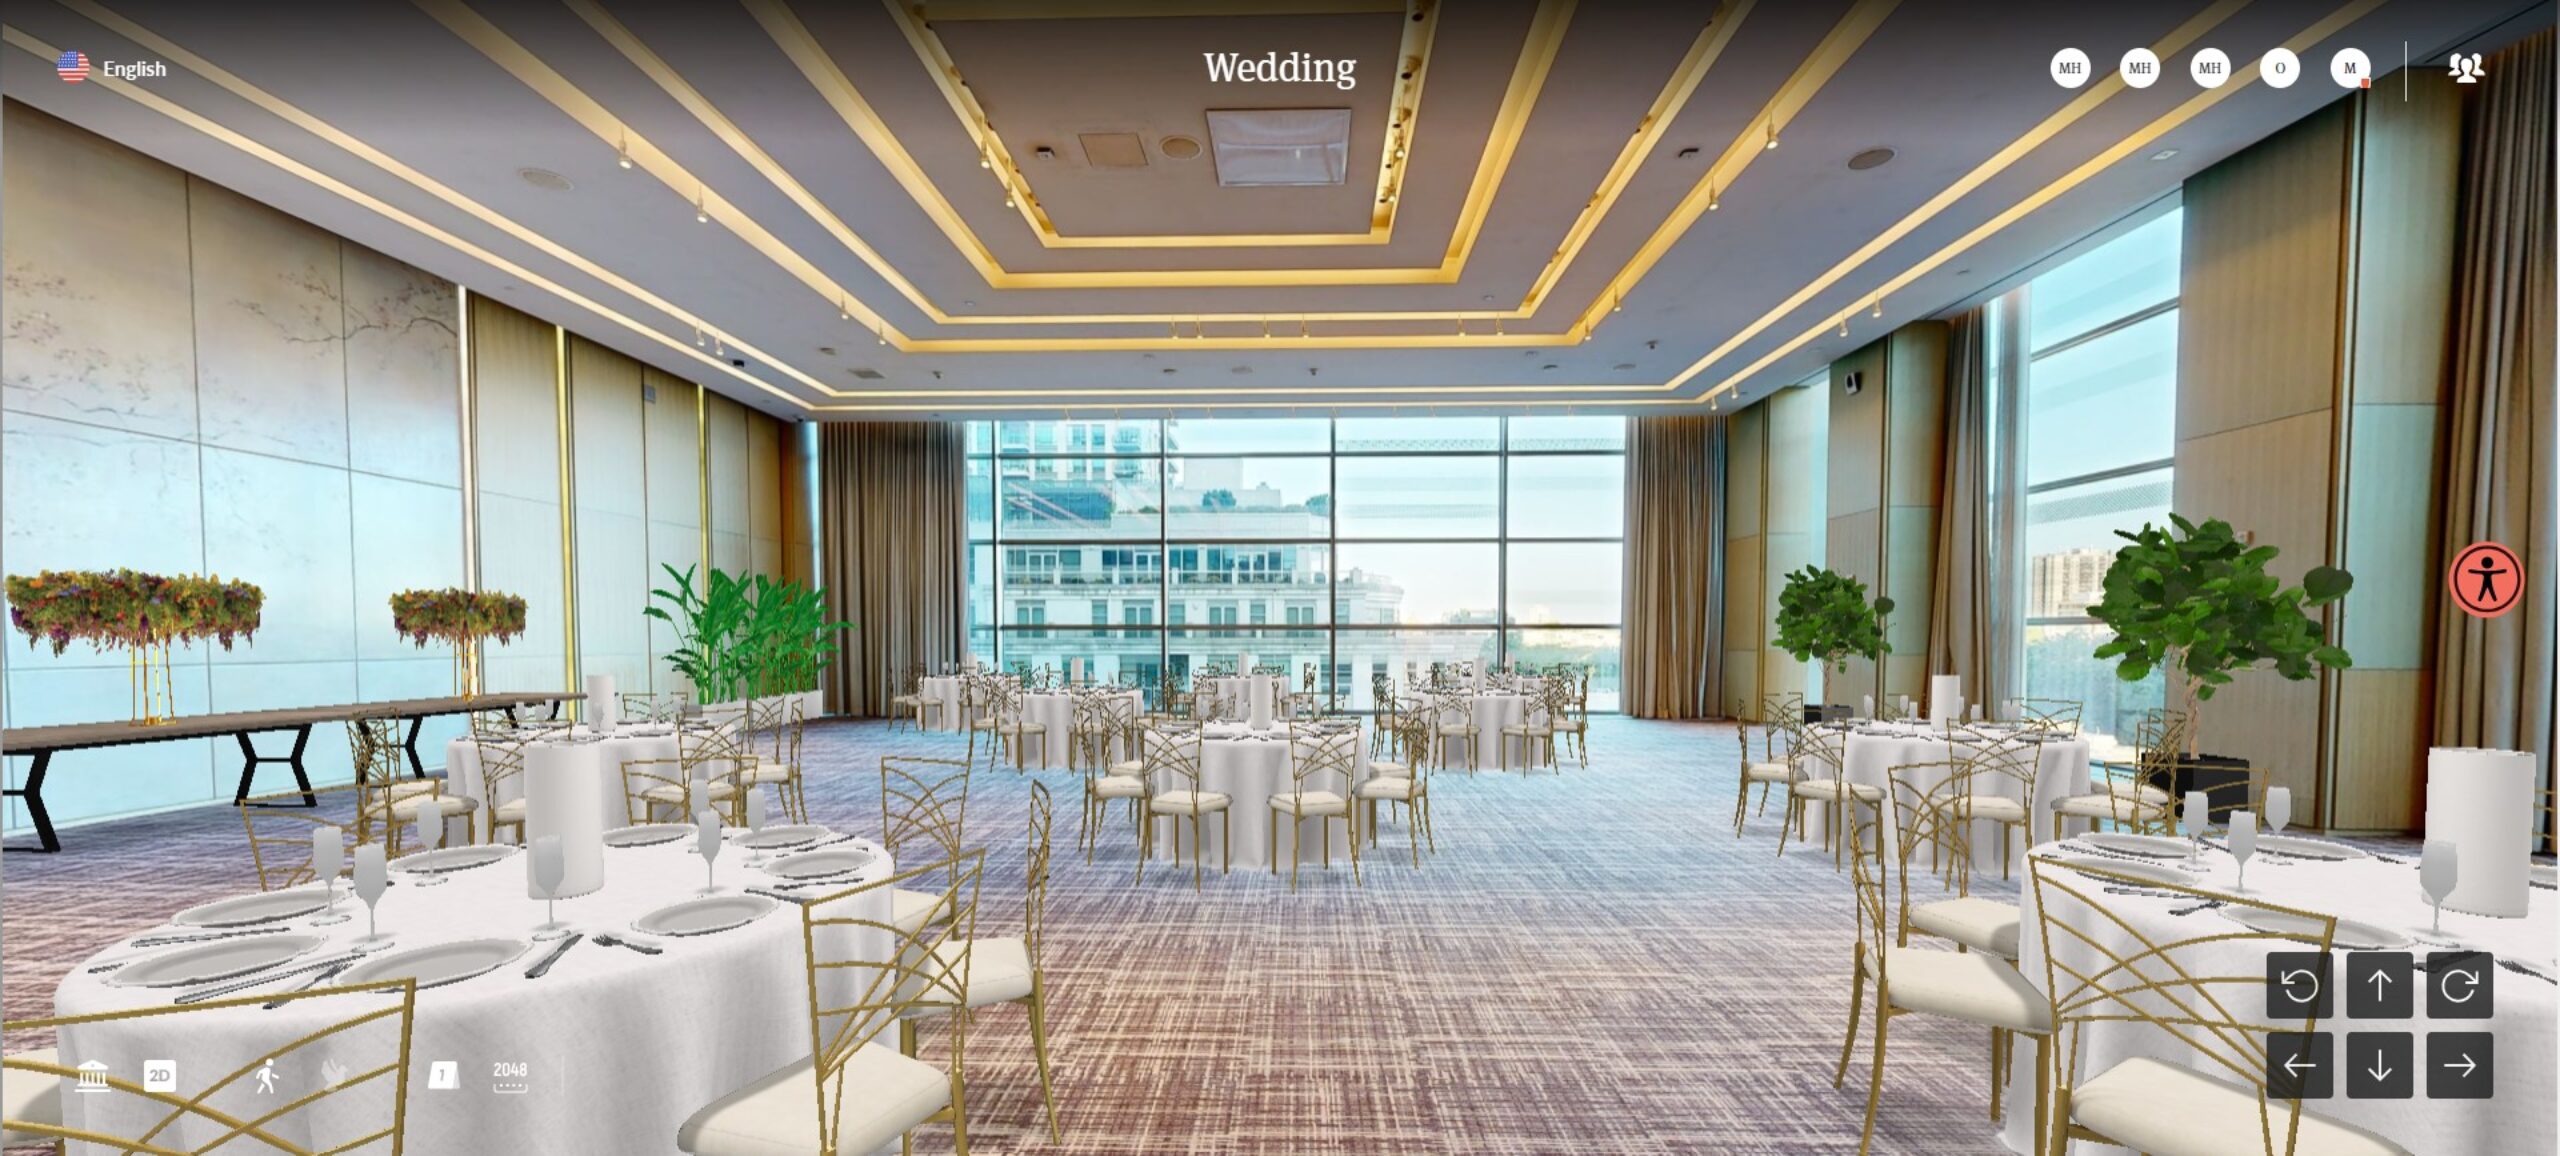 Wedding planning software rendering from Prismm's platform. The space at the Four Seasons Toronto Tor-Vinci Ballroom includes 3D chairs and tables.